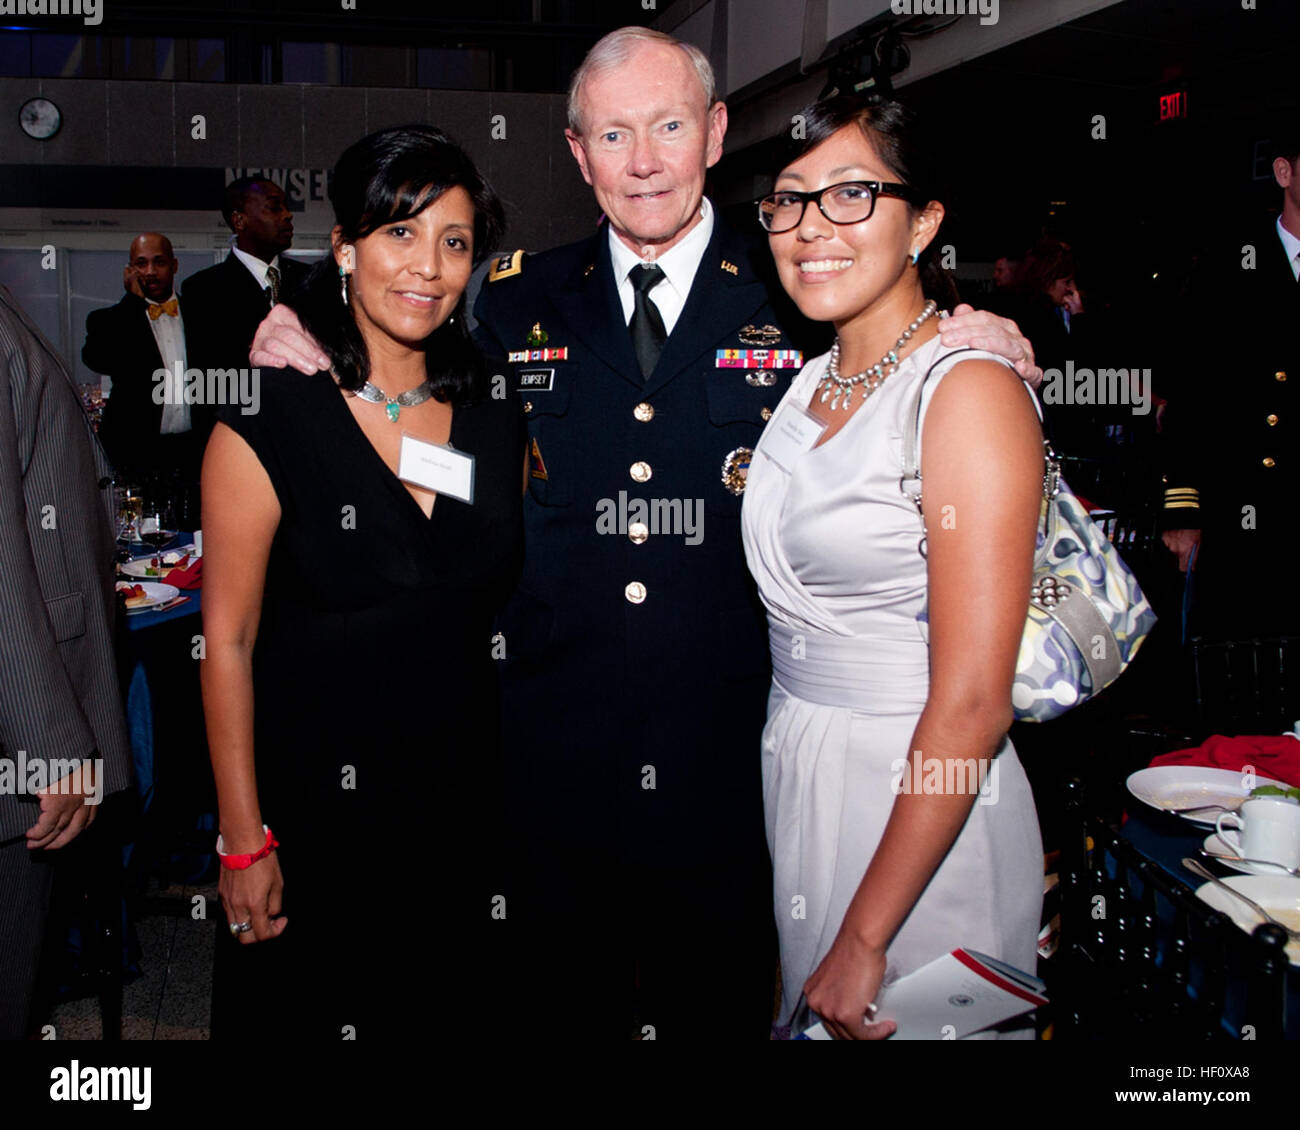 Chairman of the Joint Chiefs of Staff Army Gen. Martin E. Dempsey, center, poses for a photo with Shandiin Sam, right, a ThanksUSA scholarship recipient, and her mother during the 2012 ThanksUSA Treasure Our Troops Gala July 11, 2012, in Washington, D.C. ThanksUSA is a nonpartisan organization that encourages Americans to thank the men and women of the U.S. military by helping provide need-based college, technical and vocational school scholarships for service members' children and spouses. (Photo by Staff Sgt. Sun L. Vega) 2012 ThanksUSA Treasure Our Troops Gala 120711-D-TT930-005 Stock Photo